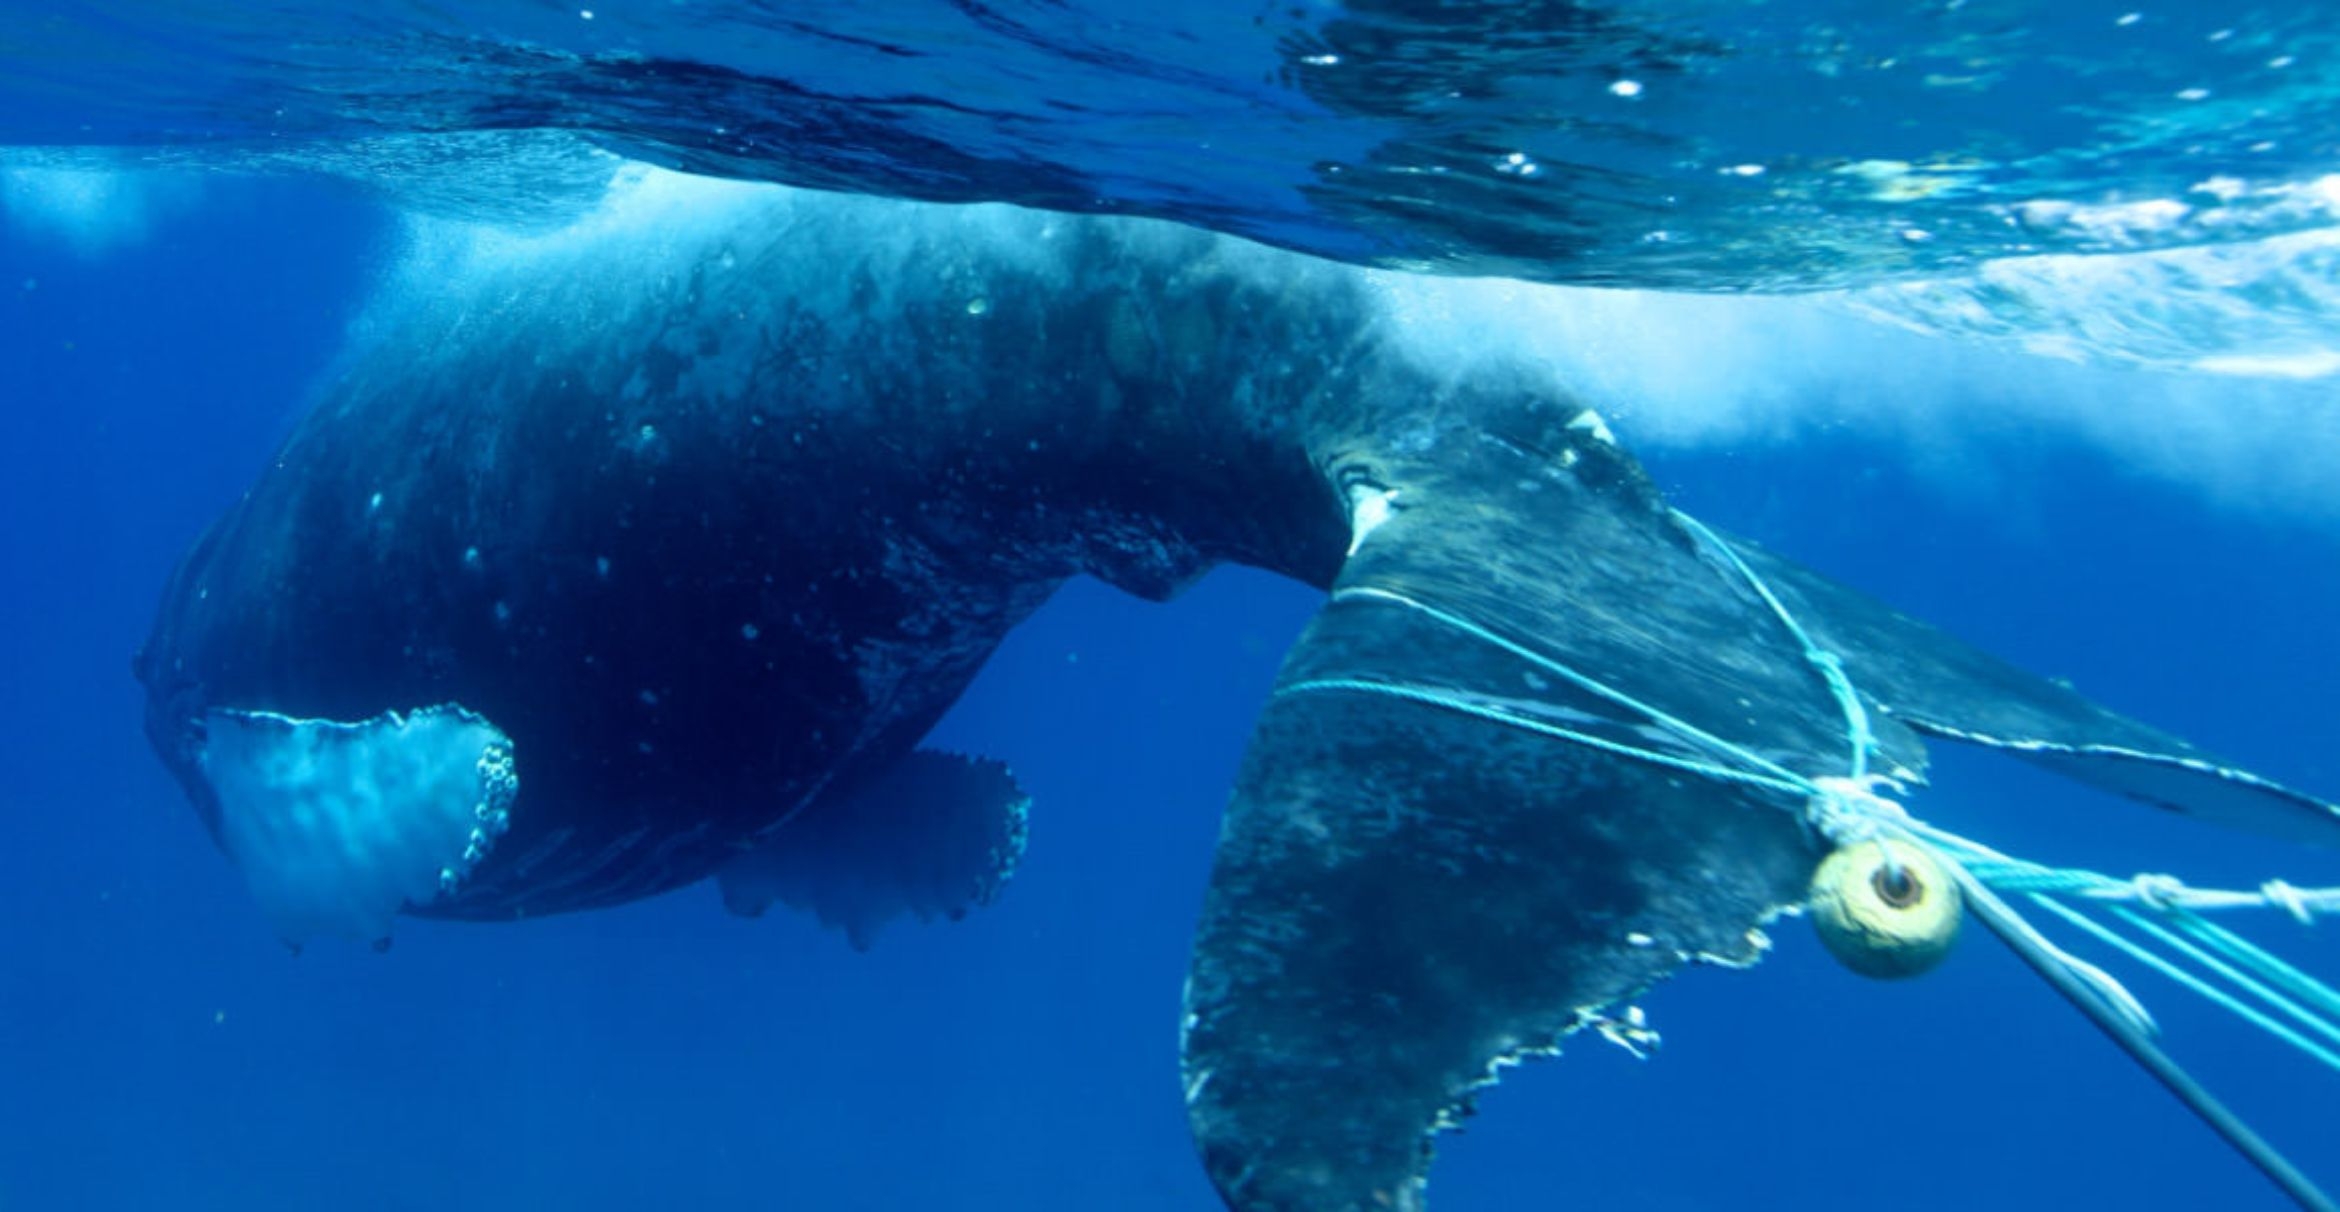 Reducing fishing gear could save whales with low impacts to California's  crab fishermen